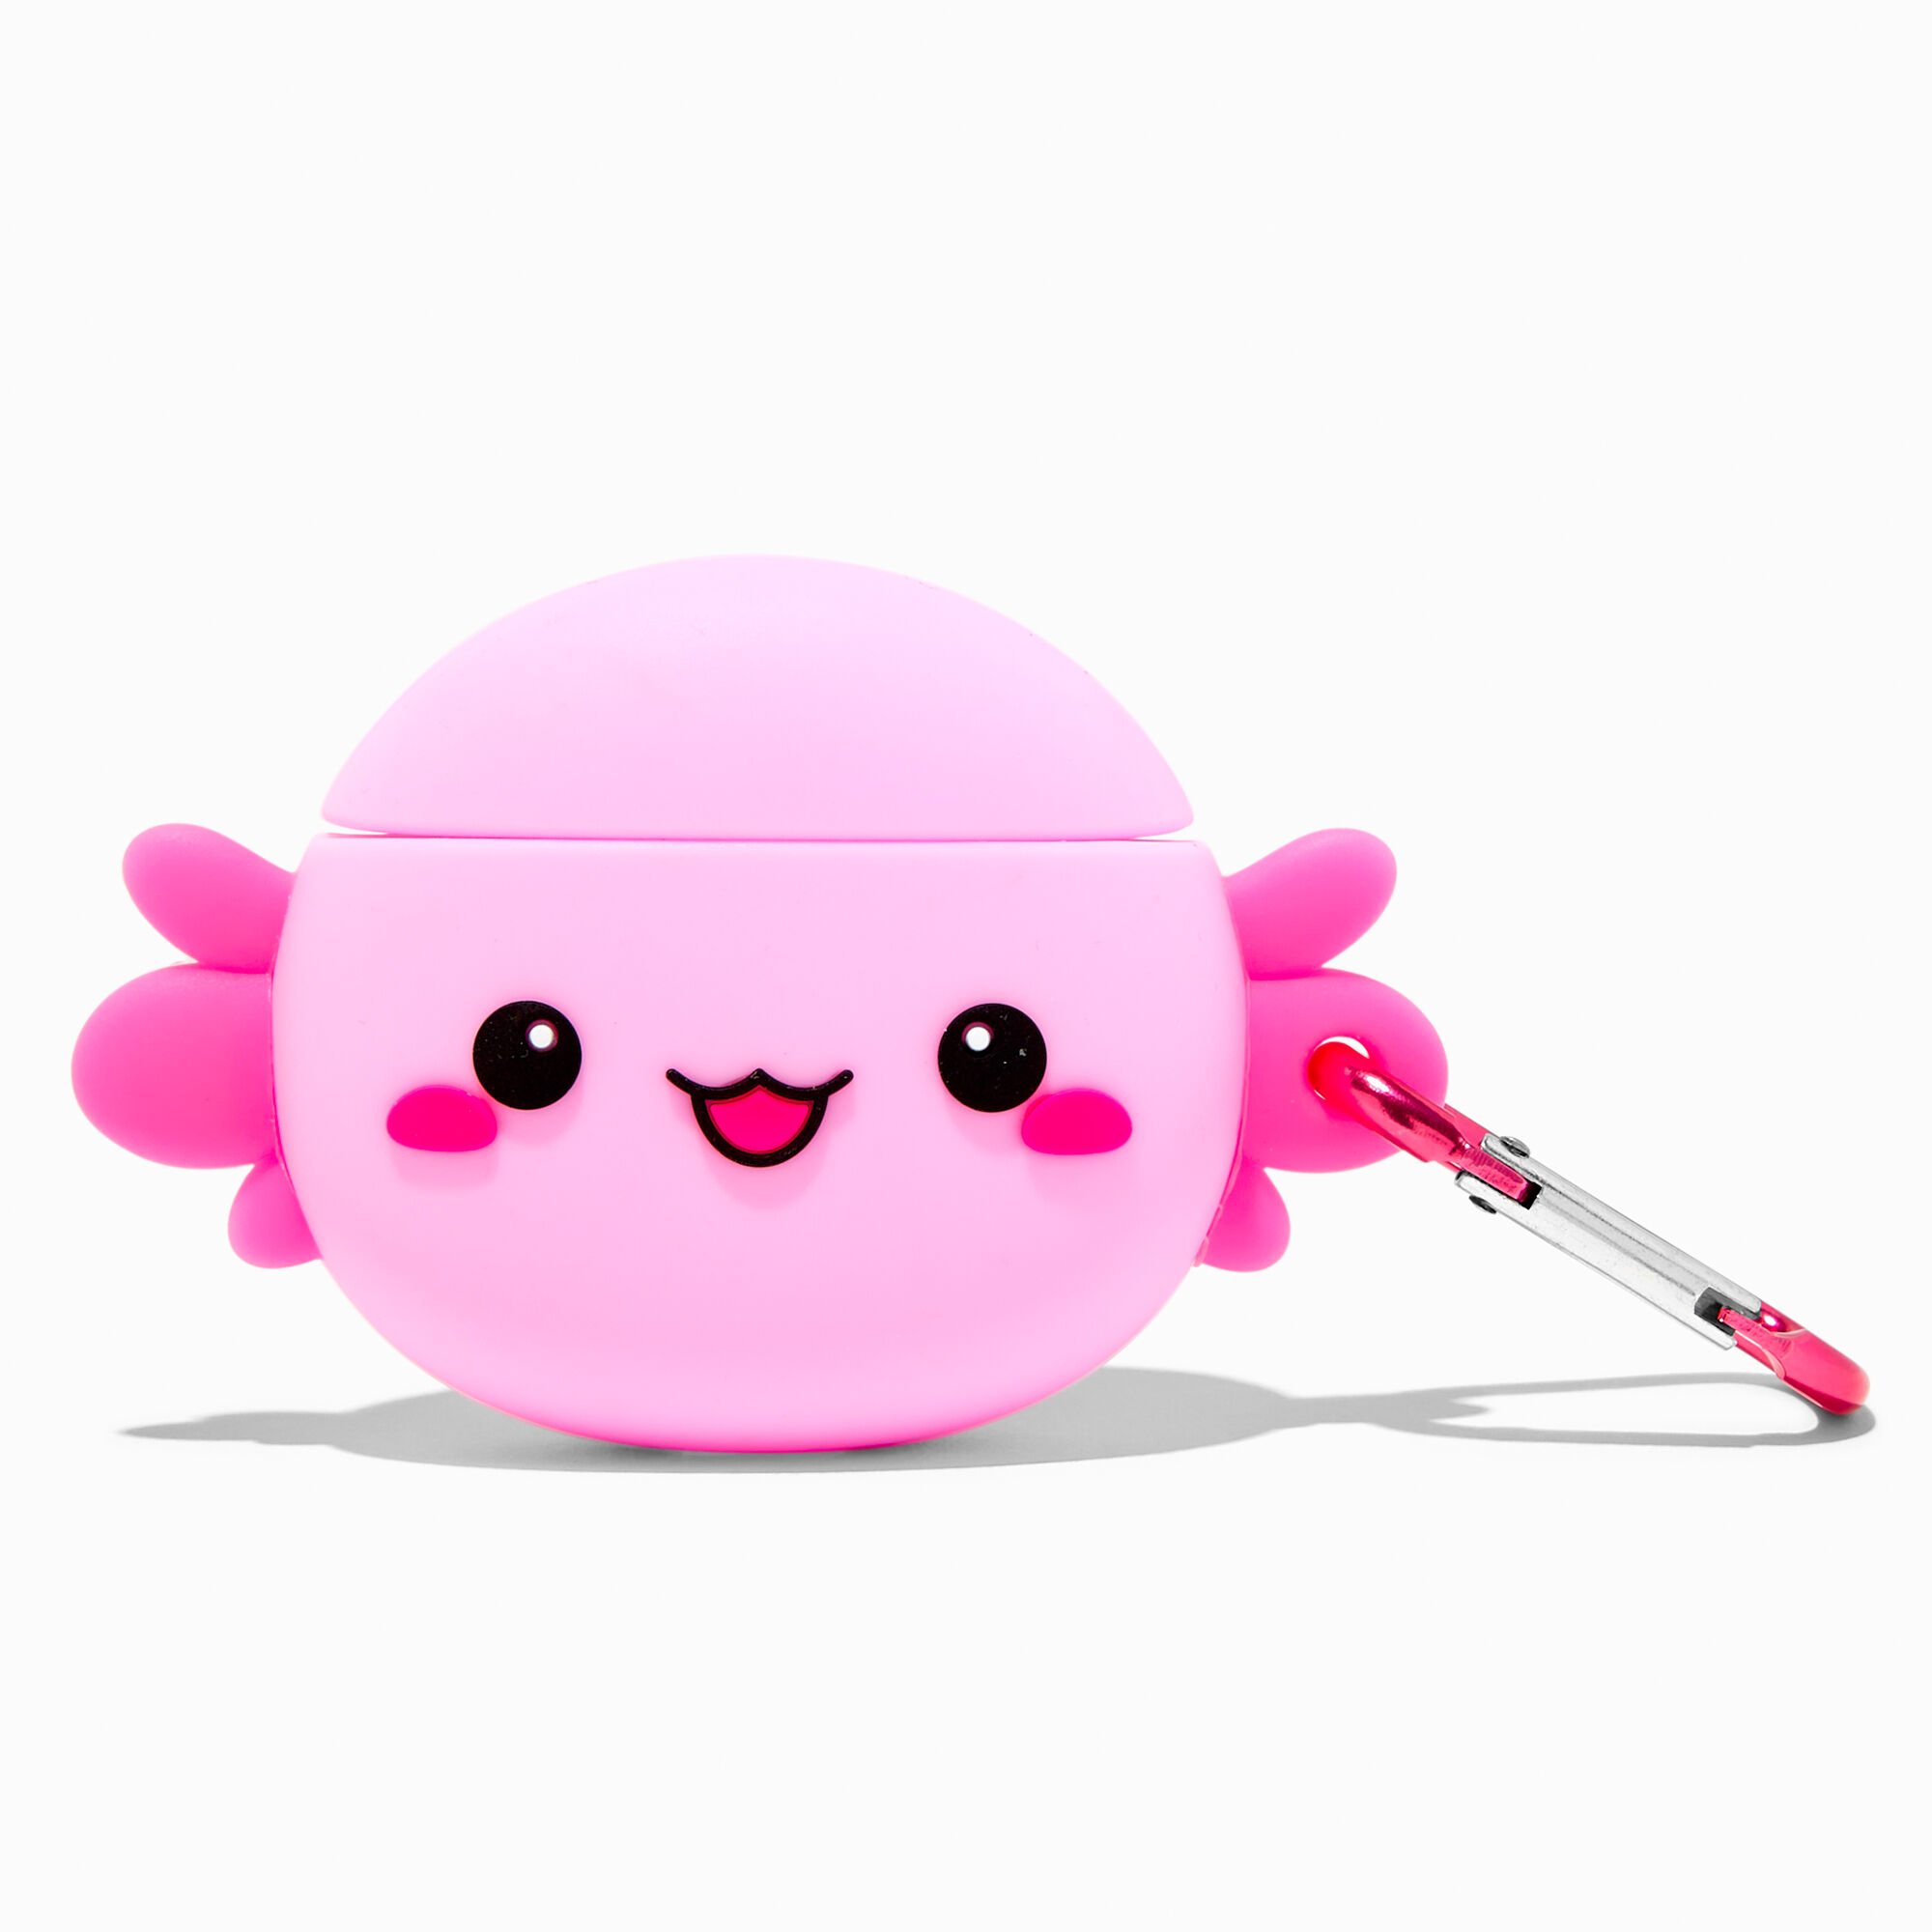 View Claires Axolotl Silicone Earbud Case Cover Compatible With Apple Airpods Pink information